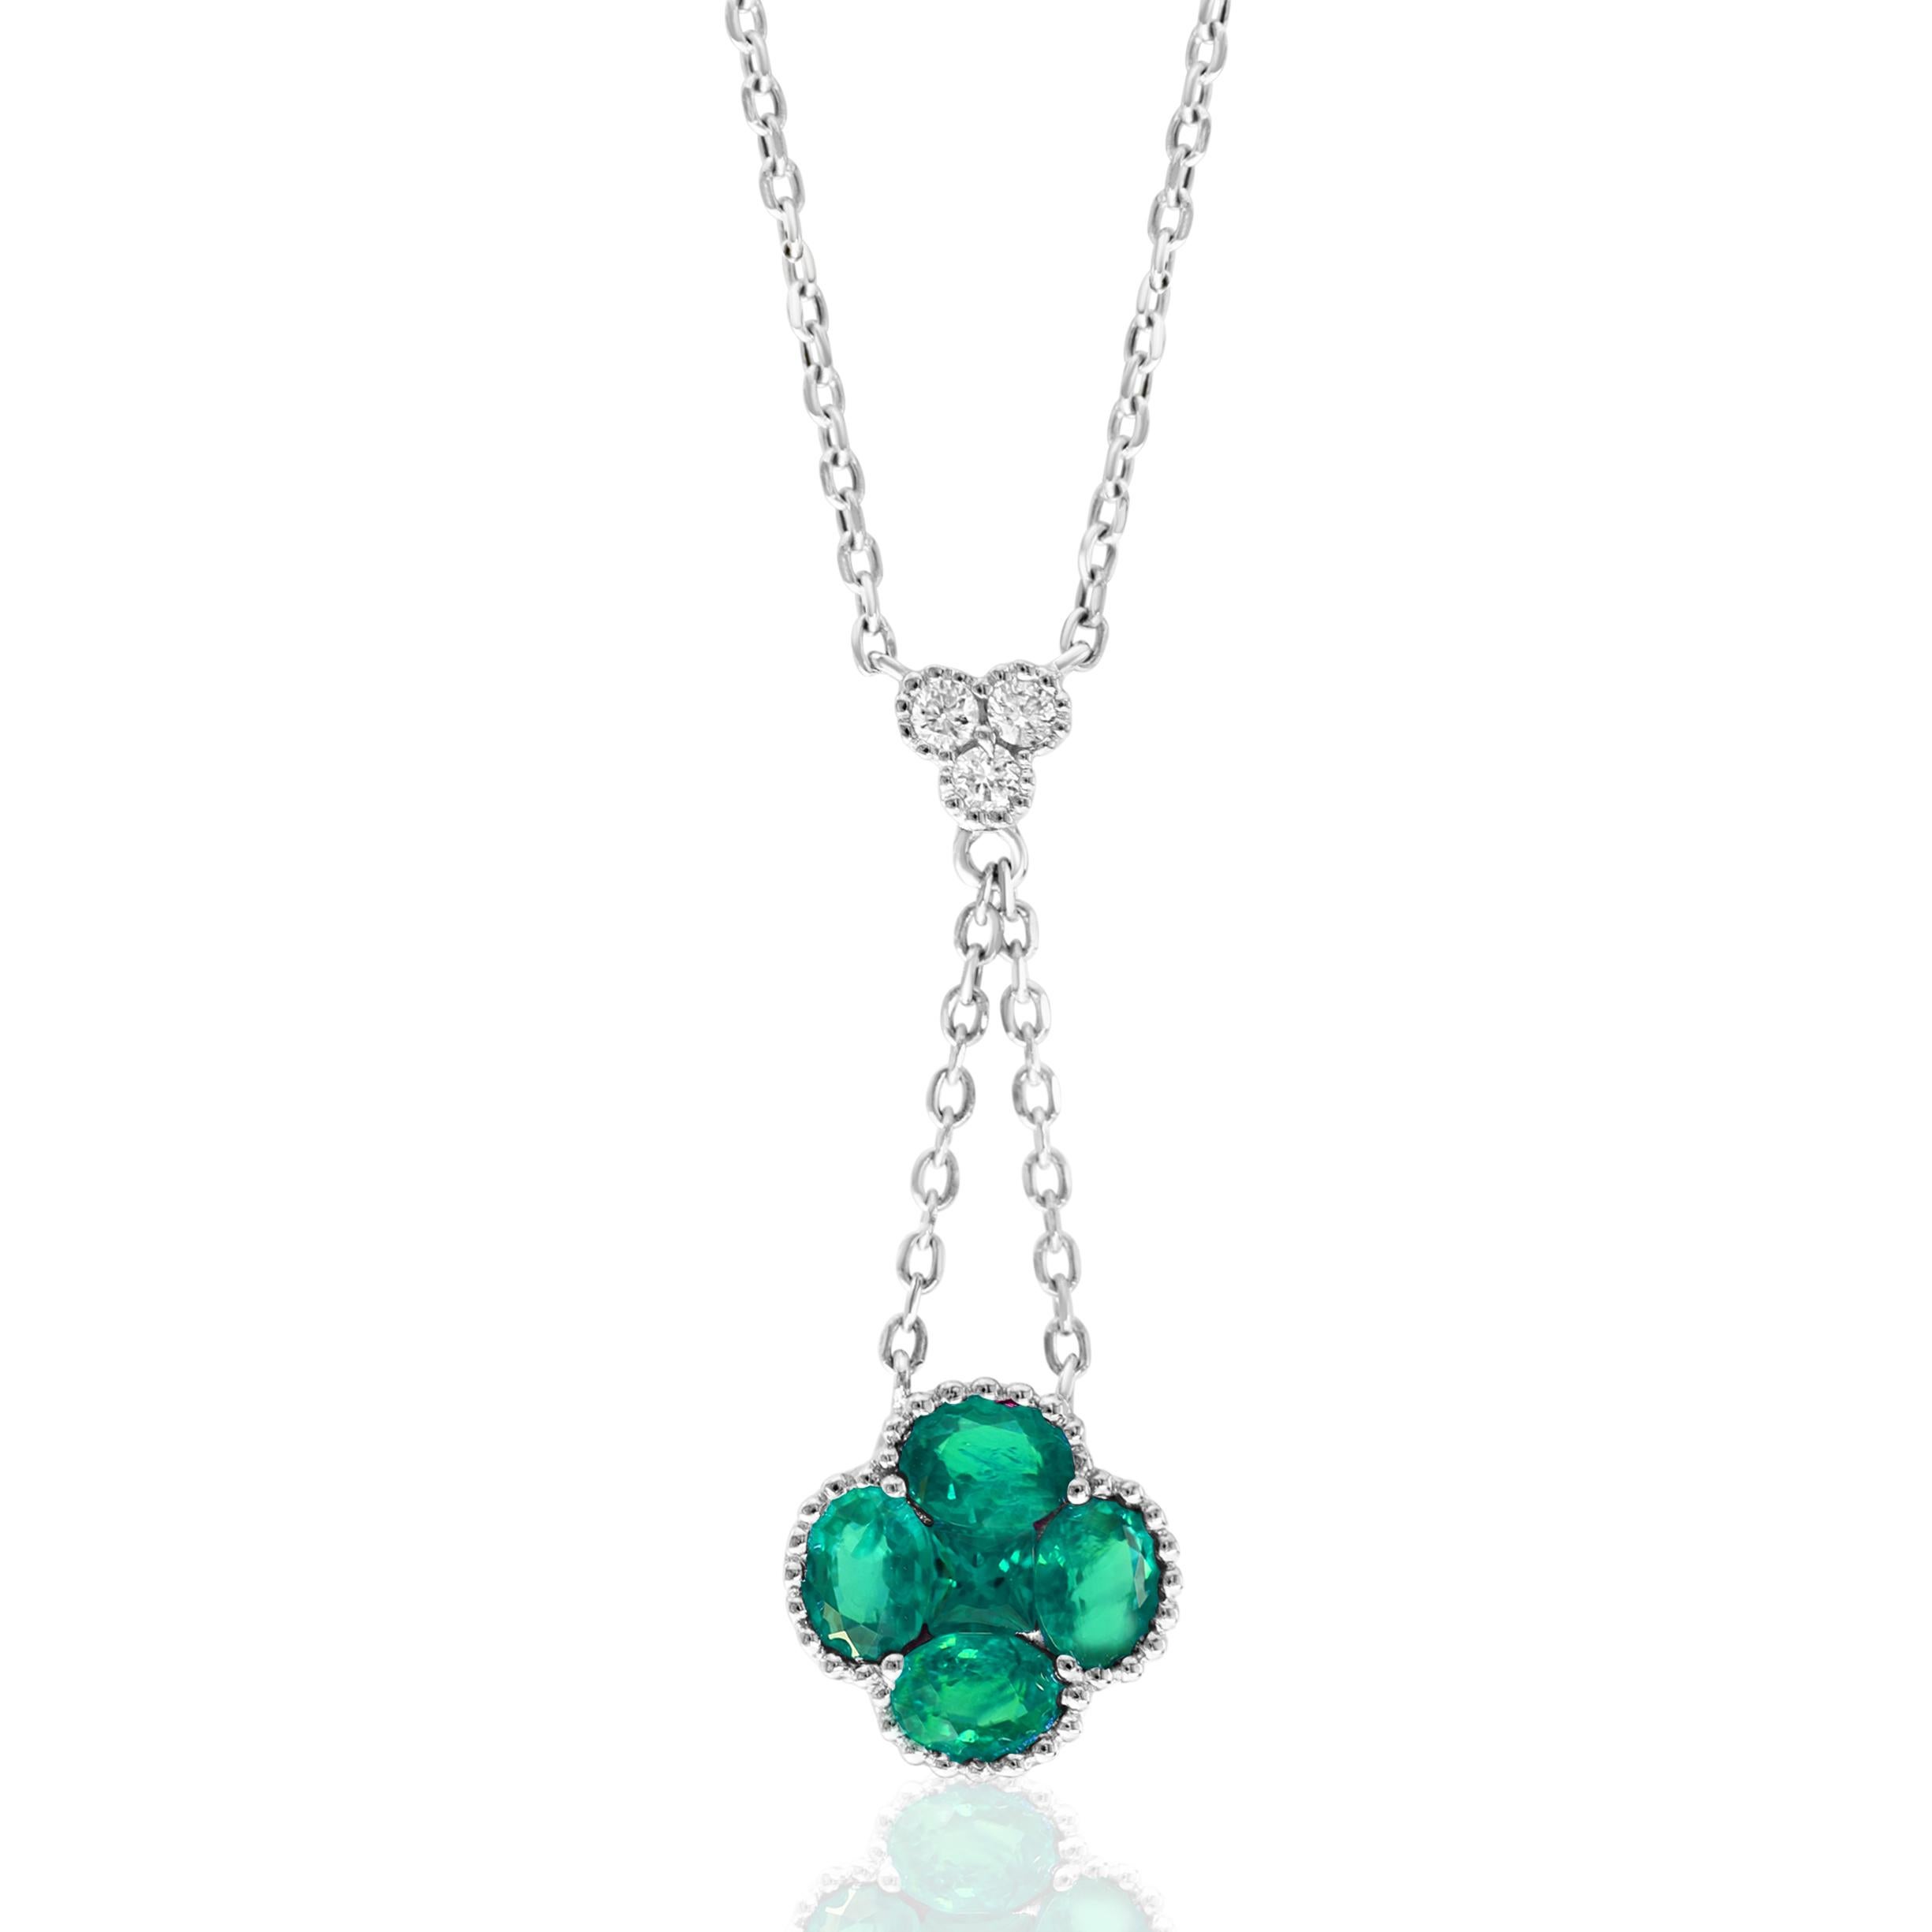 This beautiful necklace features 0.85 carat total weight in natural emeralds in a clover like shape that drops on a double chain from a trio of 0.07 carat total weight in three round diamonds. It is accented by milgrain detailing and set in 18 karat